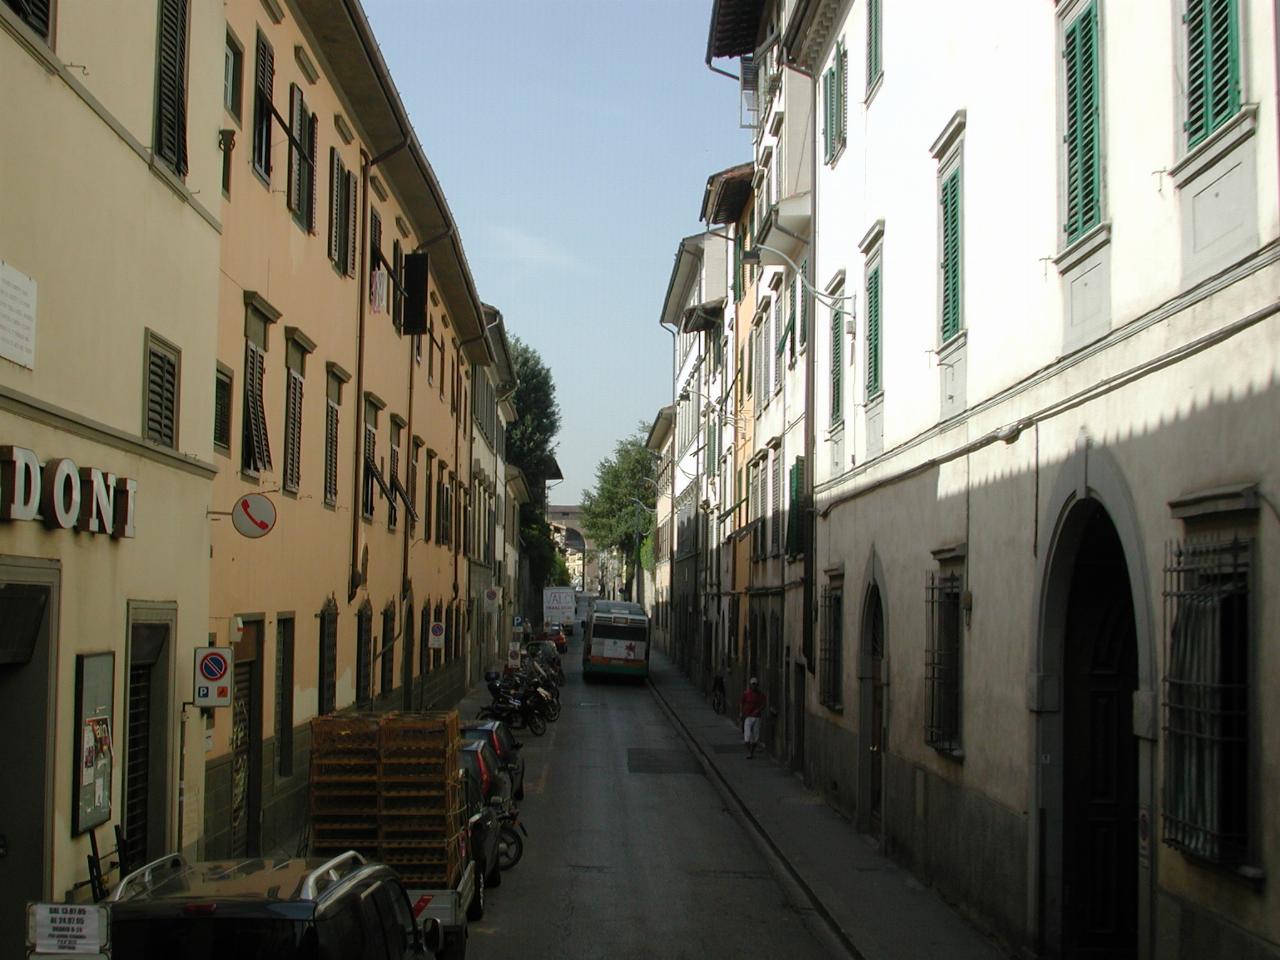 Narrow street, as seen from tour bus heading towards Piazzale Michelangelo